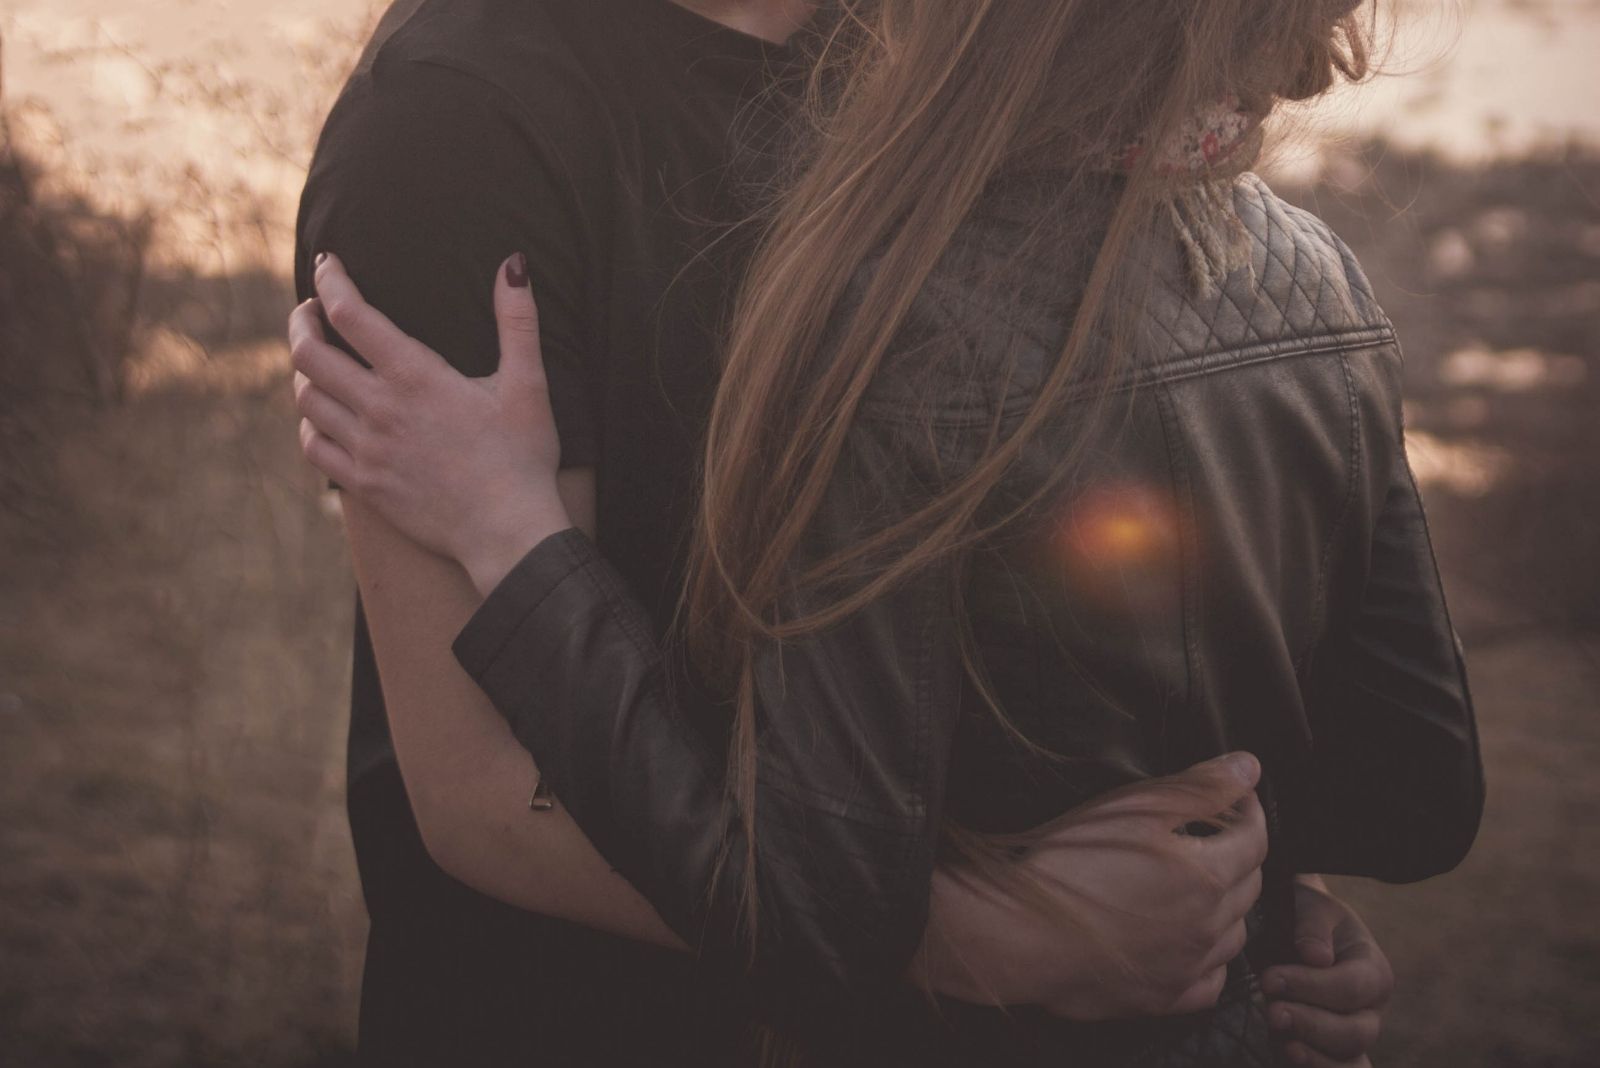 man's hand around the woman's waist while kissing outdoors in cropped image